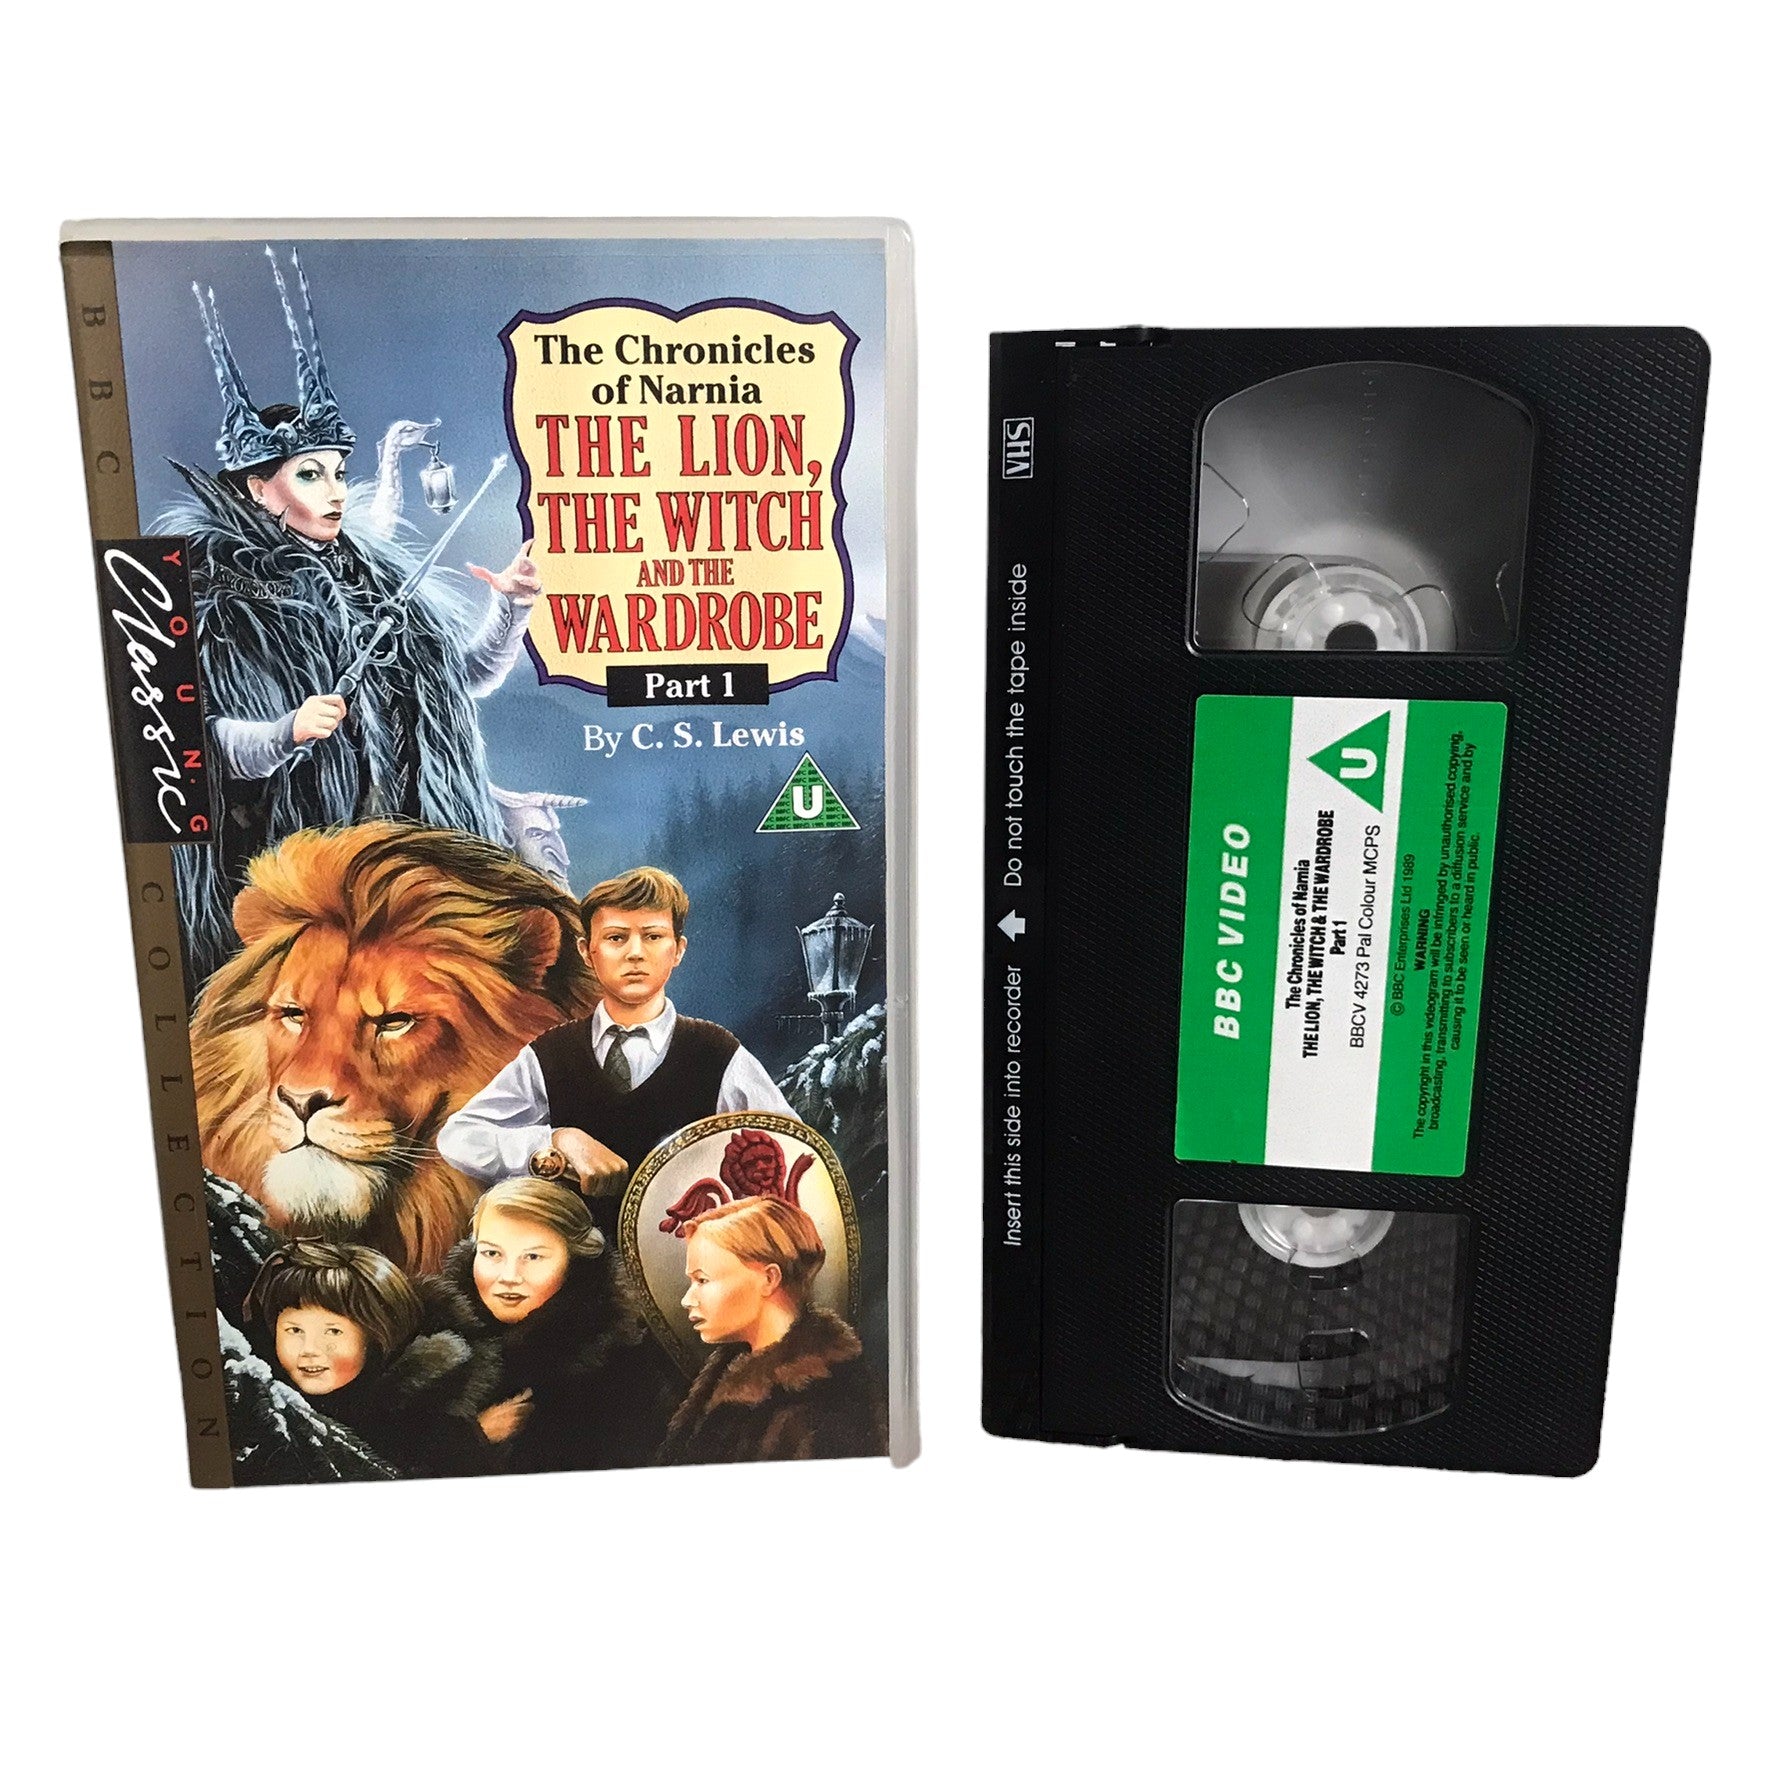 The Chronicles of Narnia The Lion, The Witch and the Wardrobe (Part-1) - William Moseley - BBC Video - Childrens - Pal - VHS-